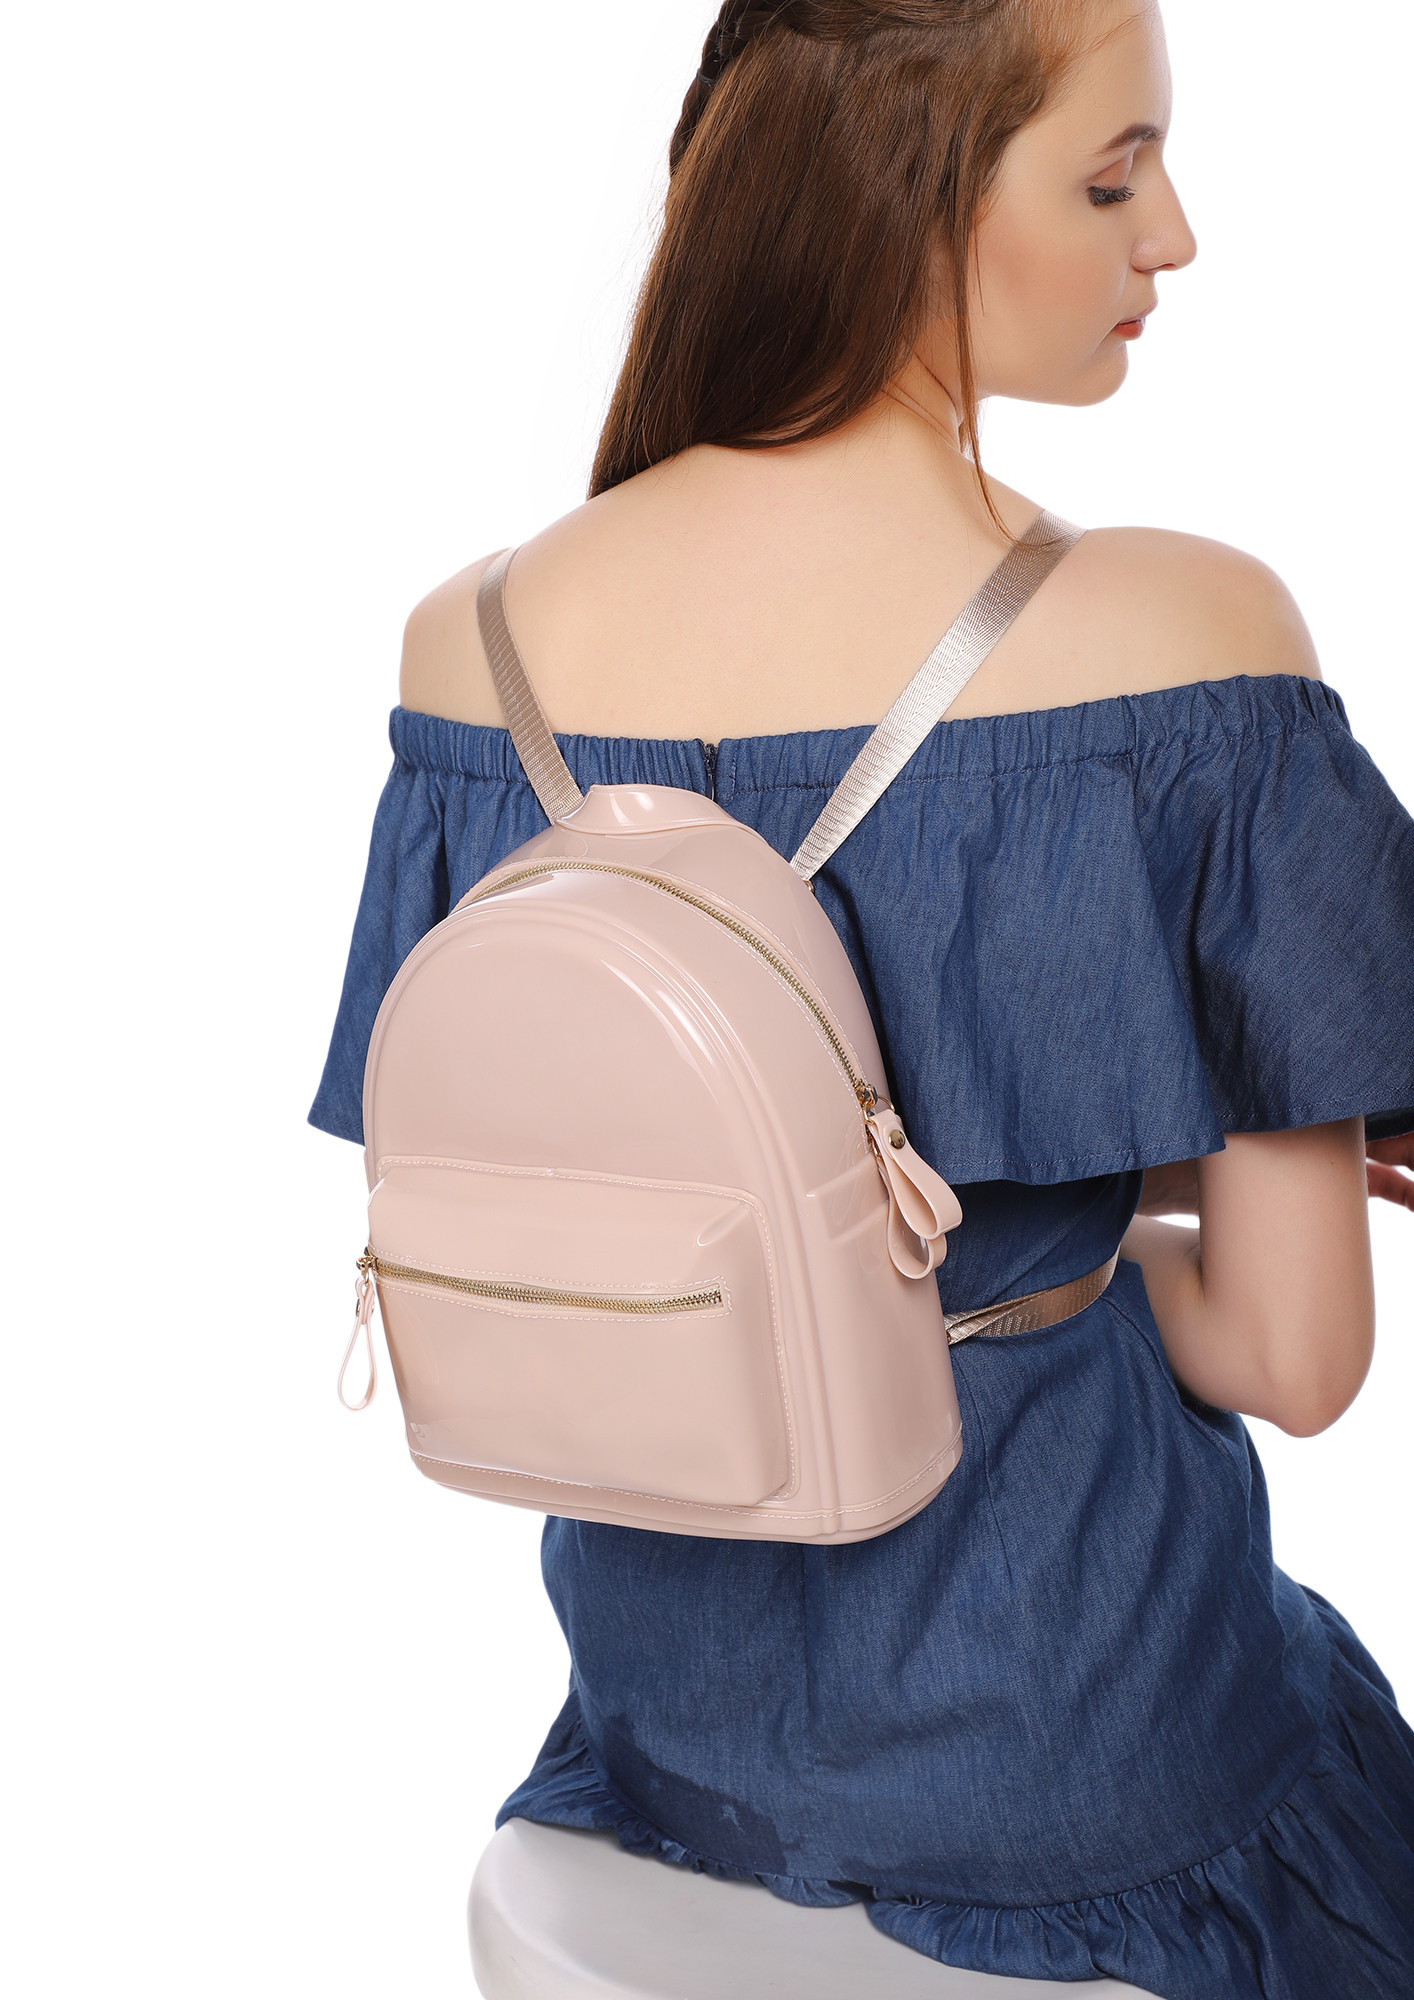 TAKE ME BACK TO SCHOOL NUDE BACKPACK